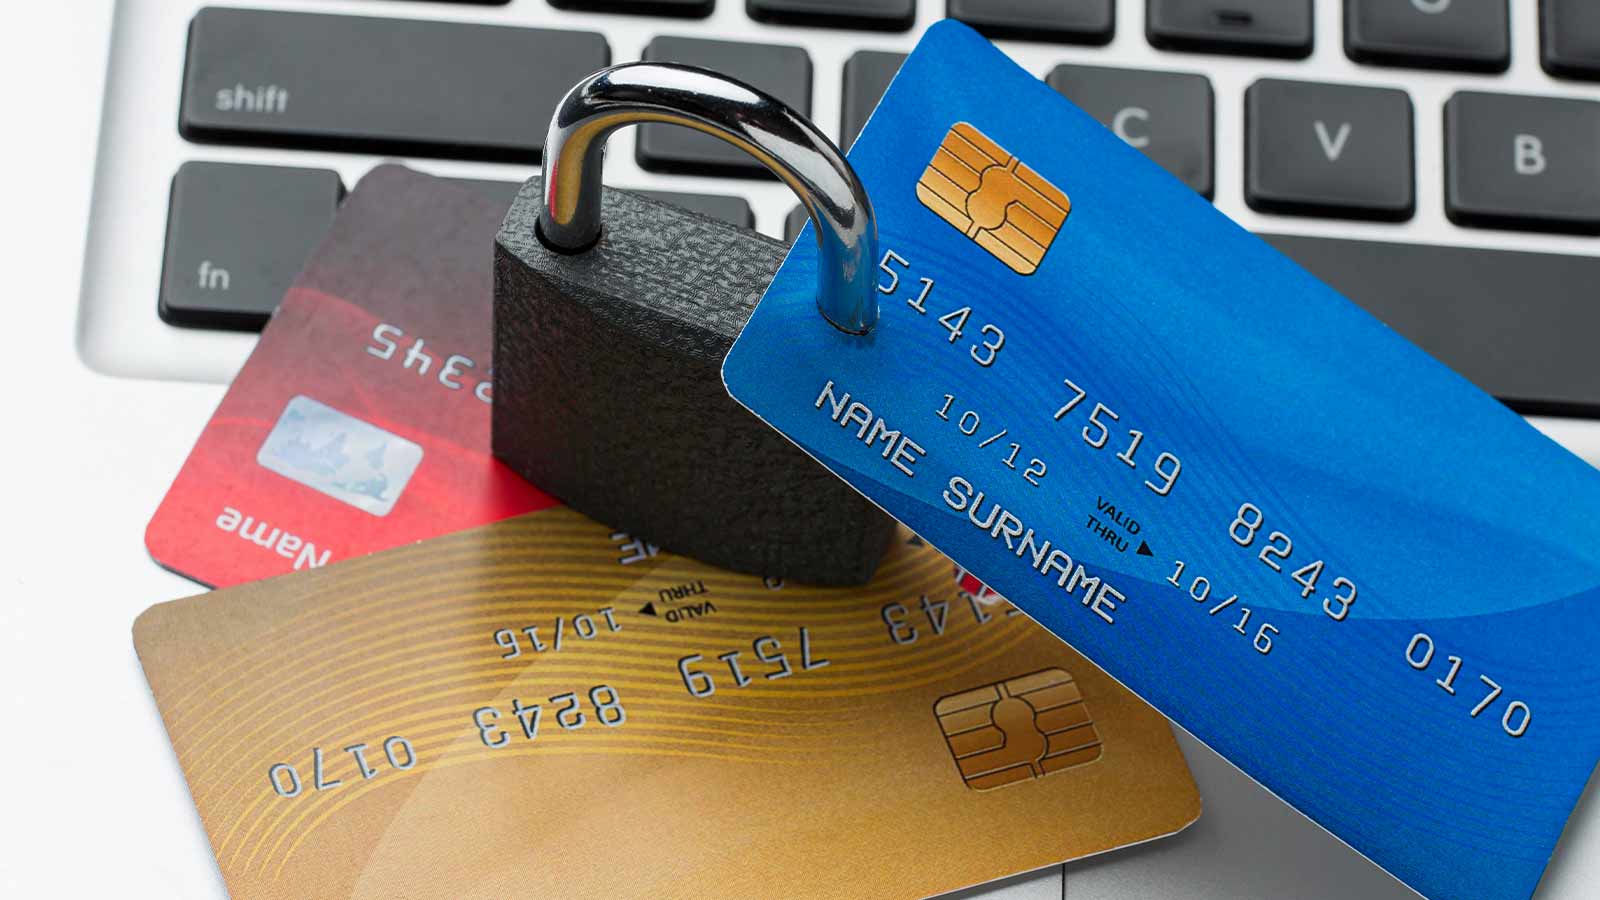 There is more than one type of identity theft and scams. Here are some things you can do depending on your situation